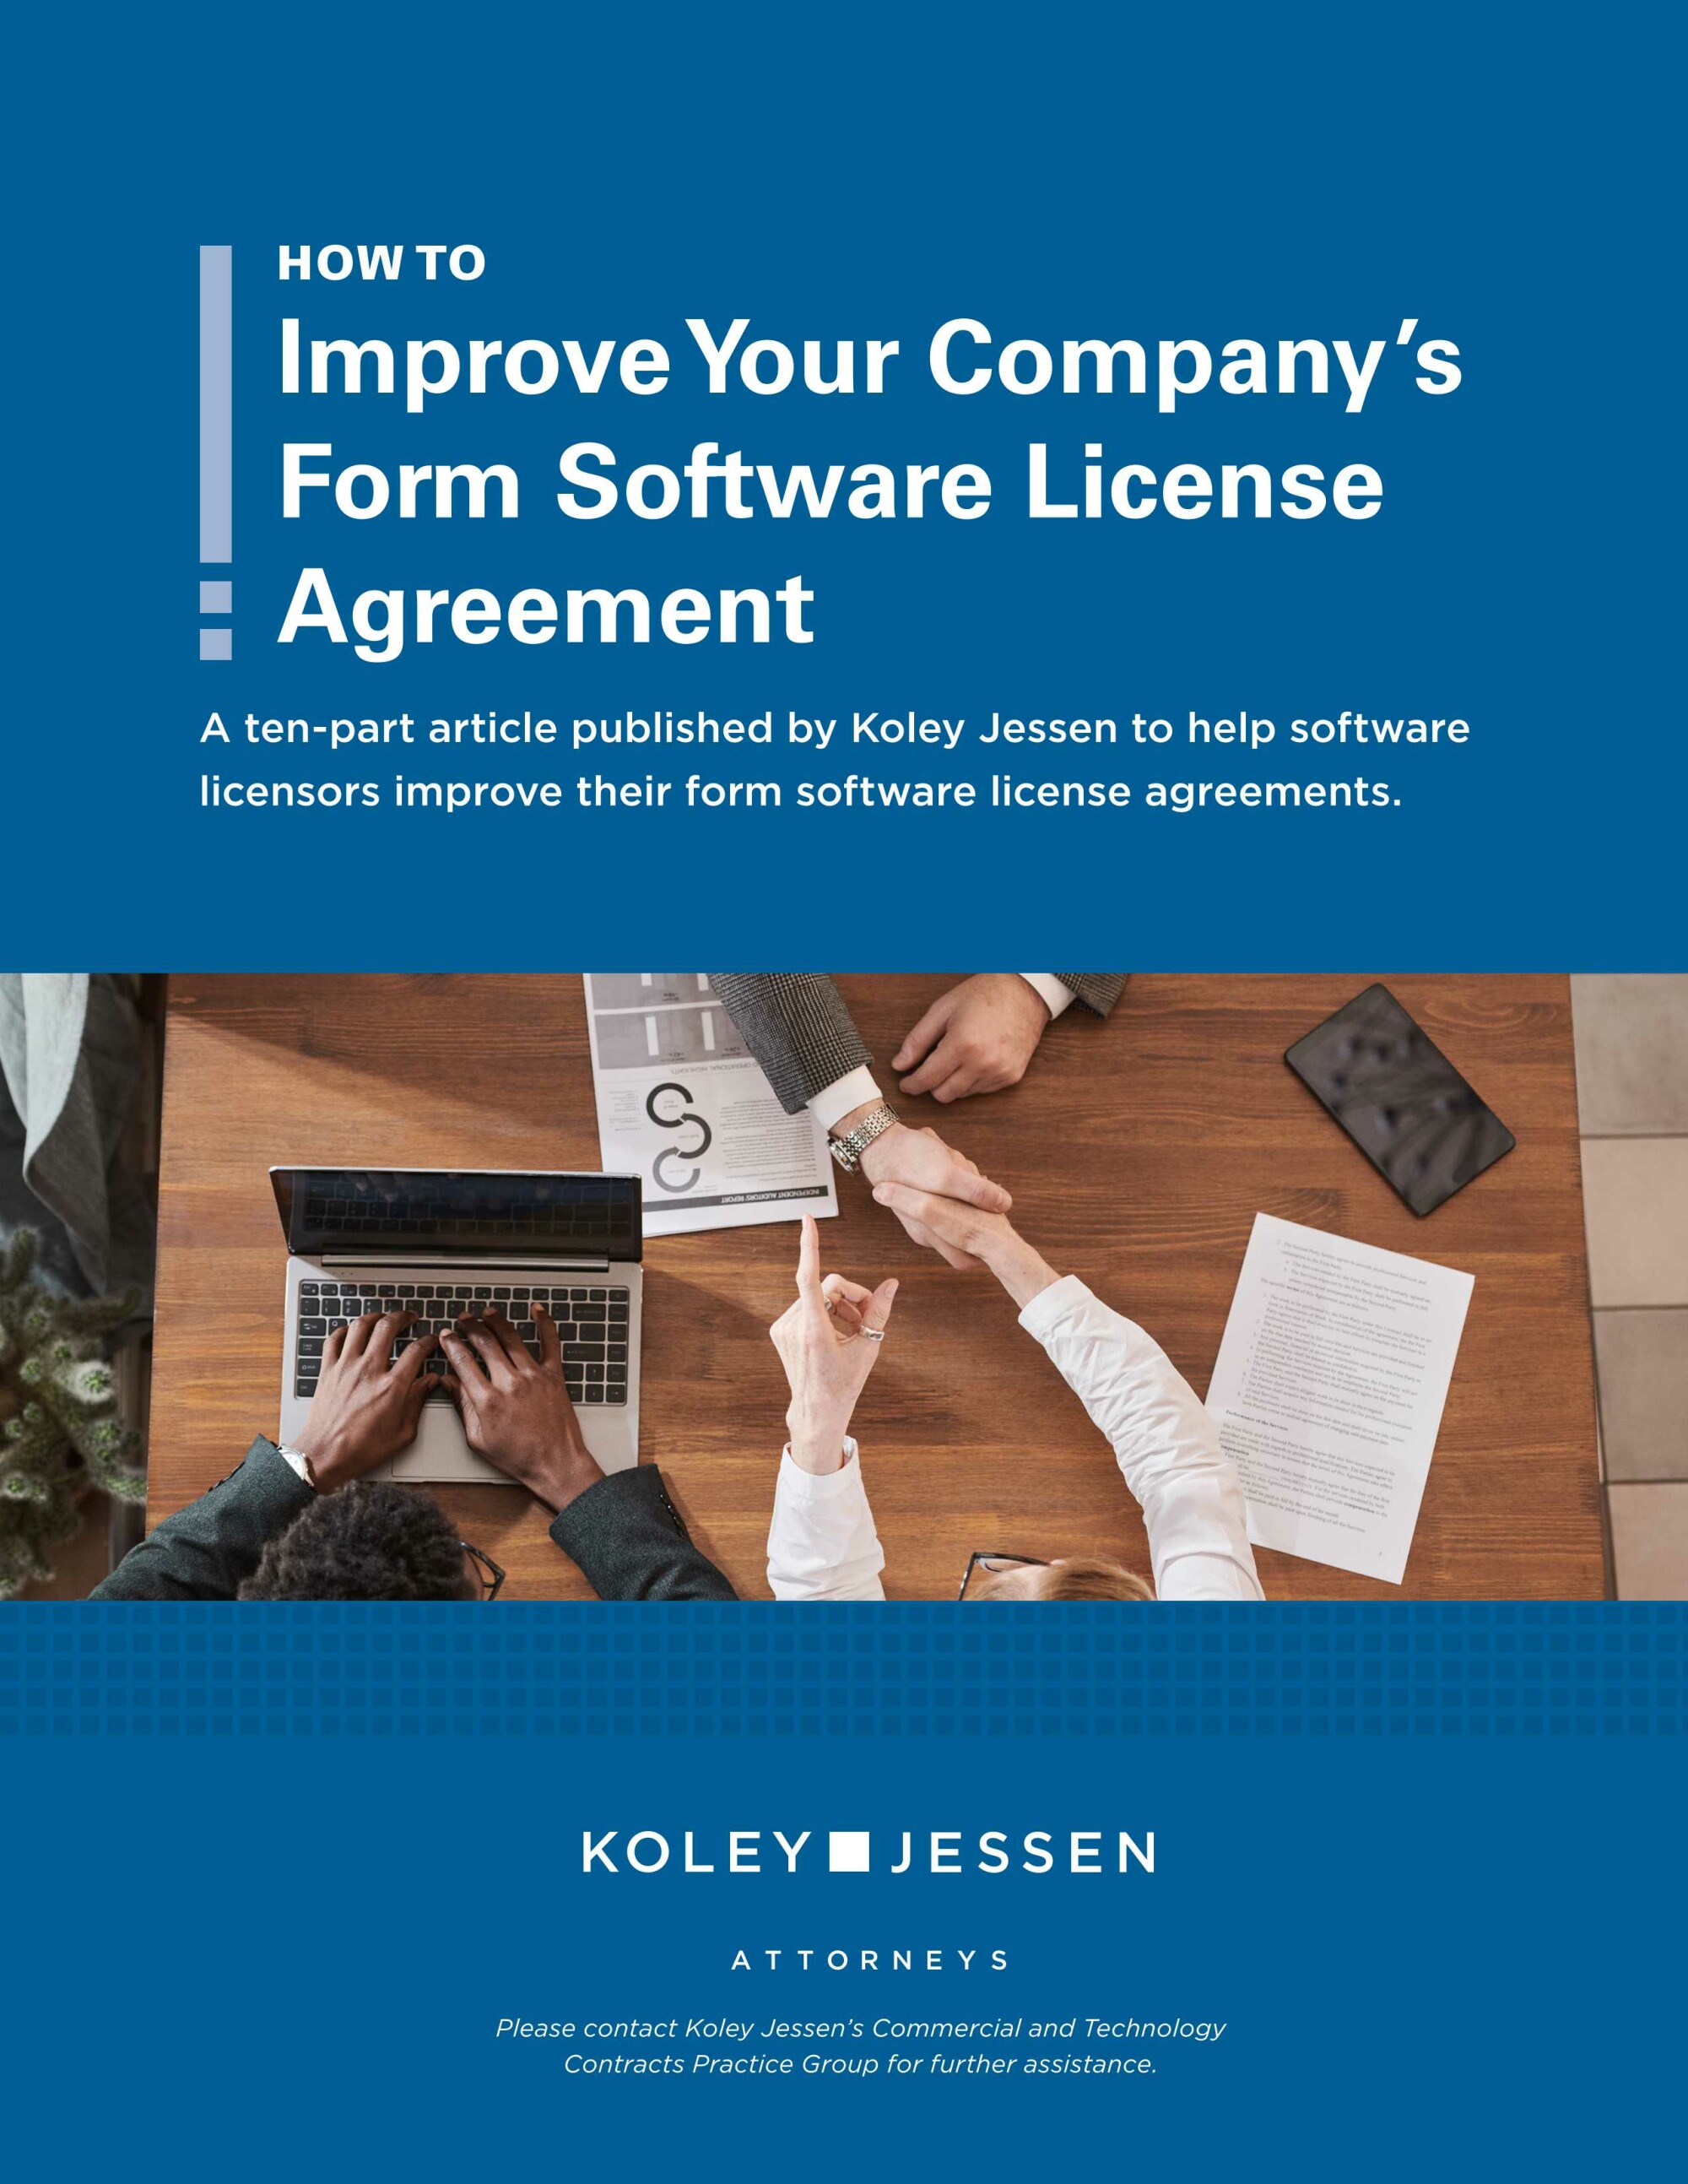 How to Improve Your Company’s Form Software License Agreement Article Series